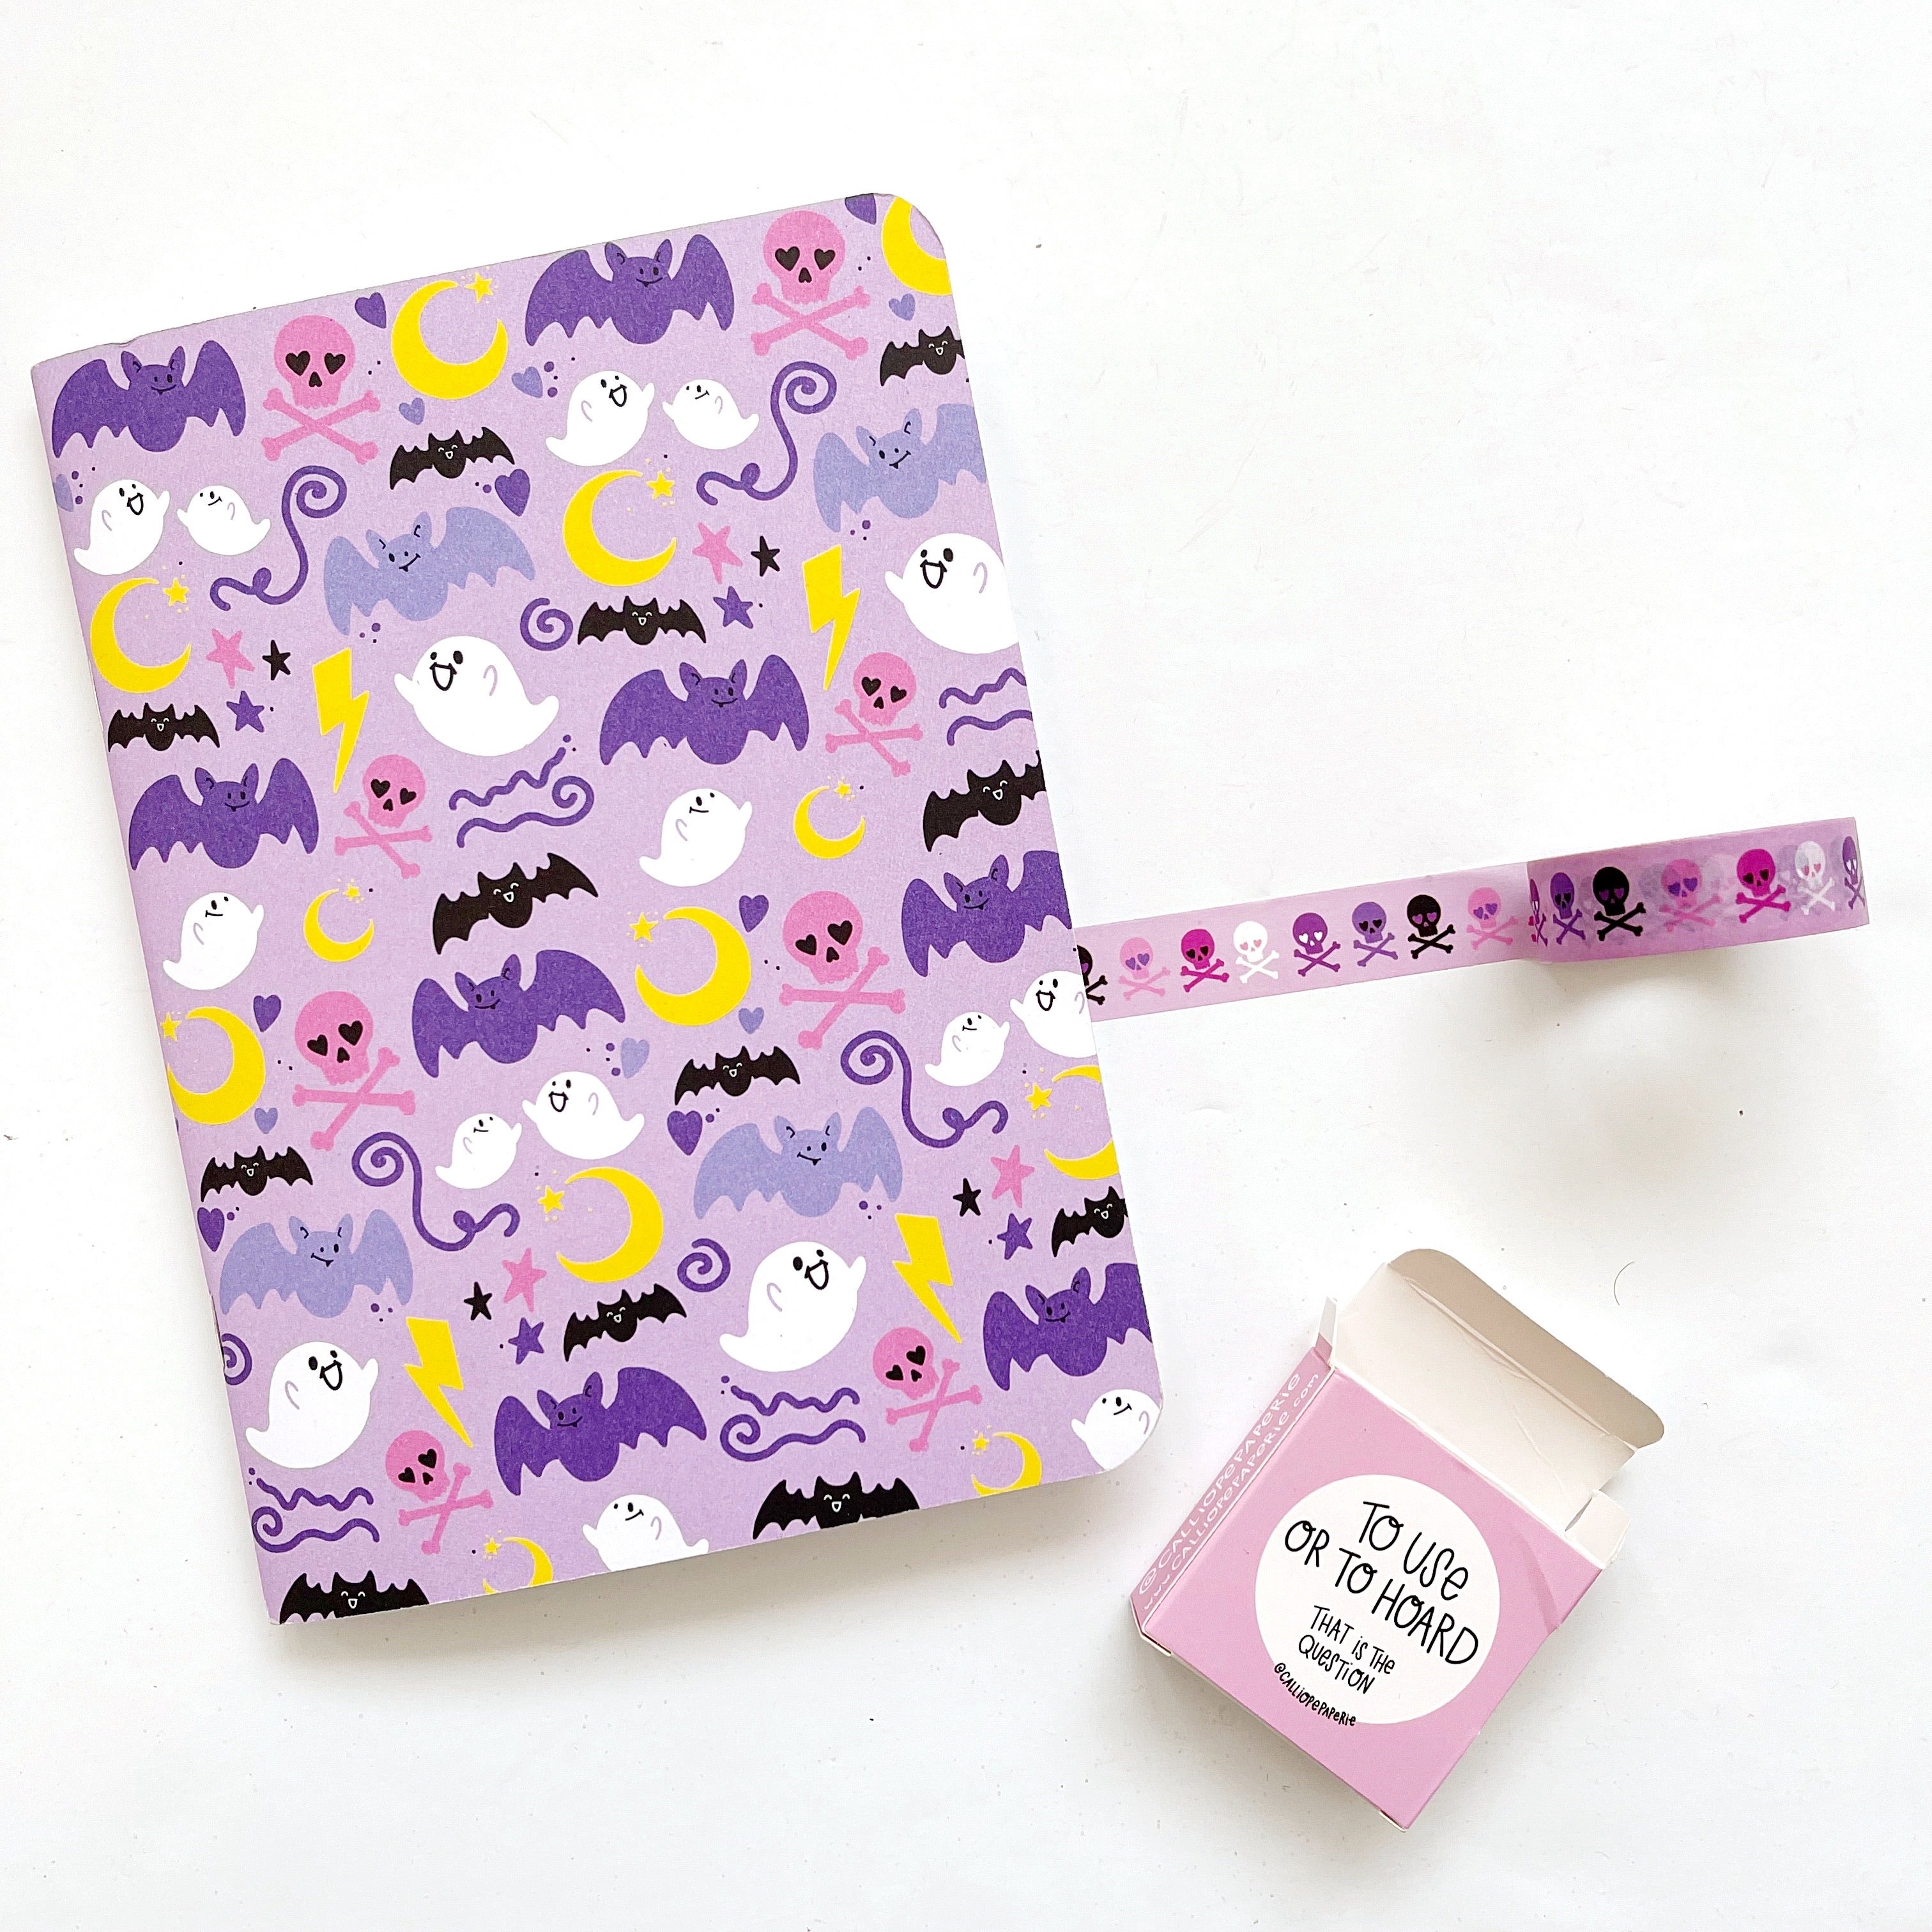 Image of notebook with lilac background and images of purple bats, white ghosts, yellow moons, pink skulls and black bats.